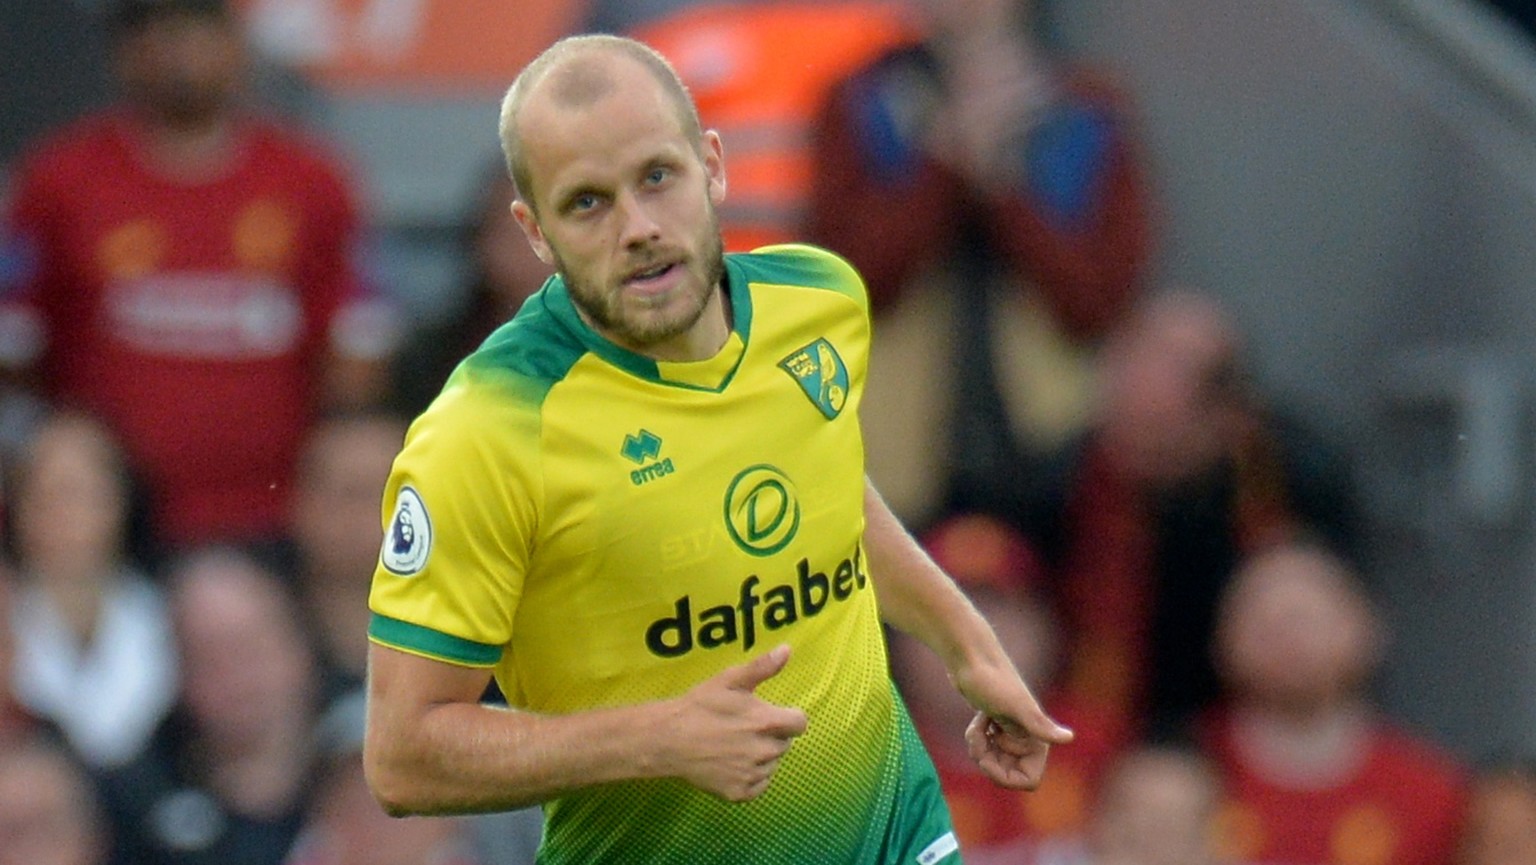 epa07764855 Teemu Pukki of Norwich City in action during the English Premier League soccer match between Liverpool FC and Norwich City at Anfield, Liverpool, Britain, 09 August 2019. EPA/PETER POWELL  ...